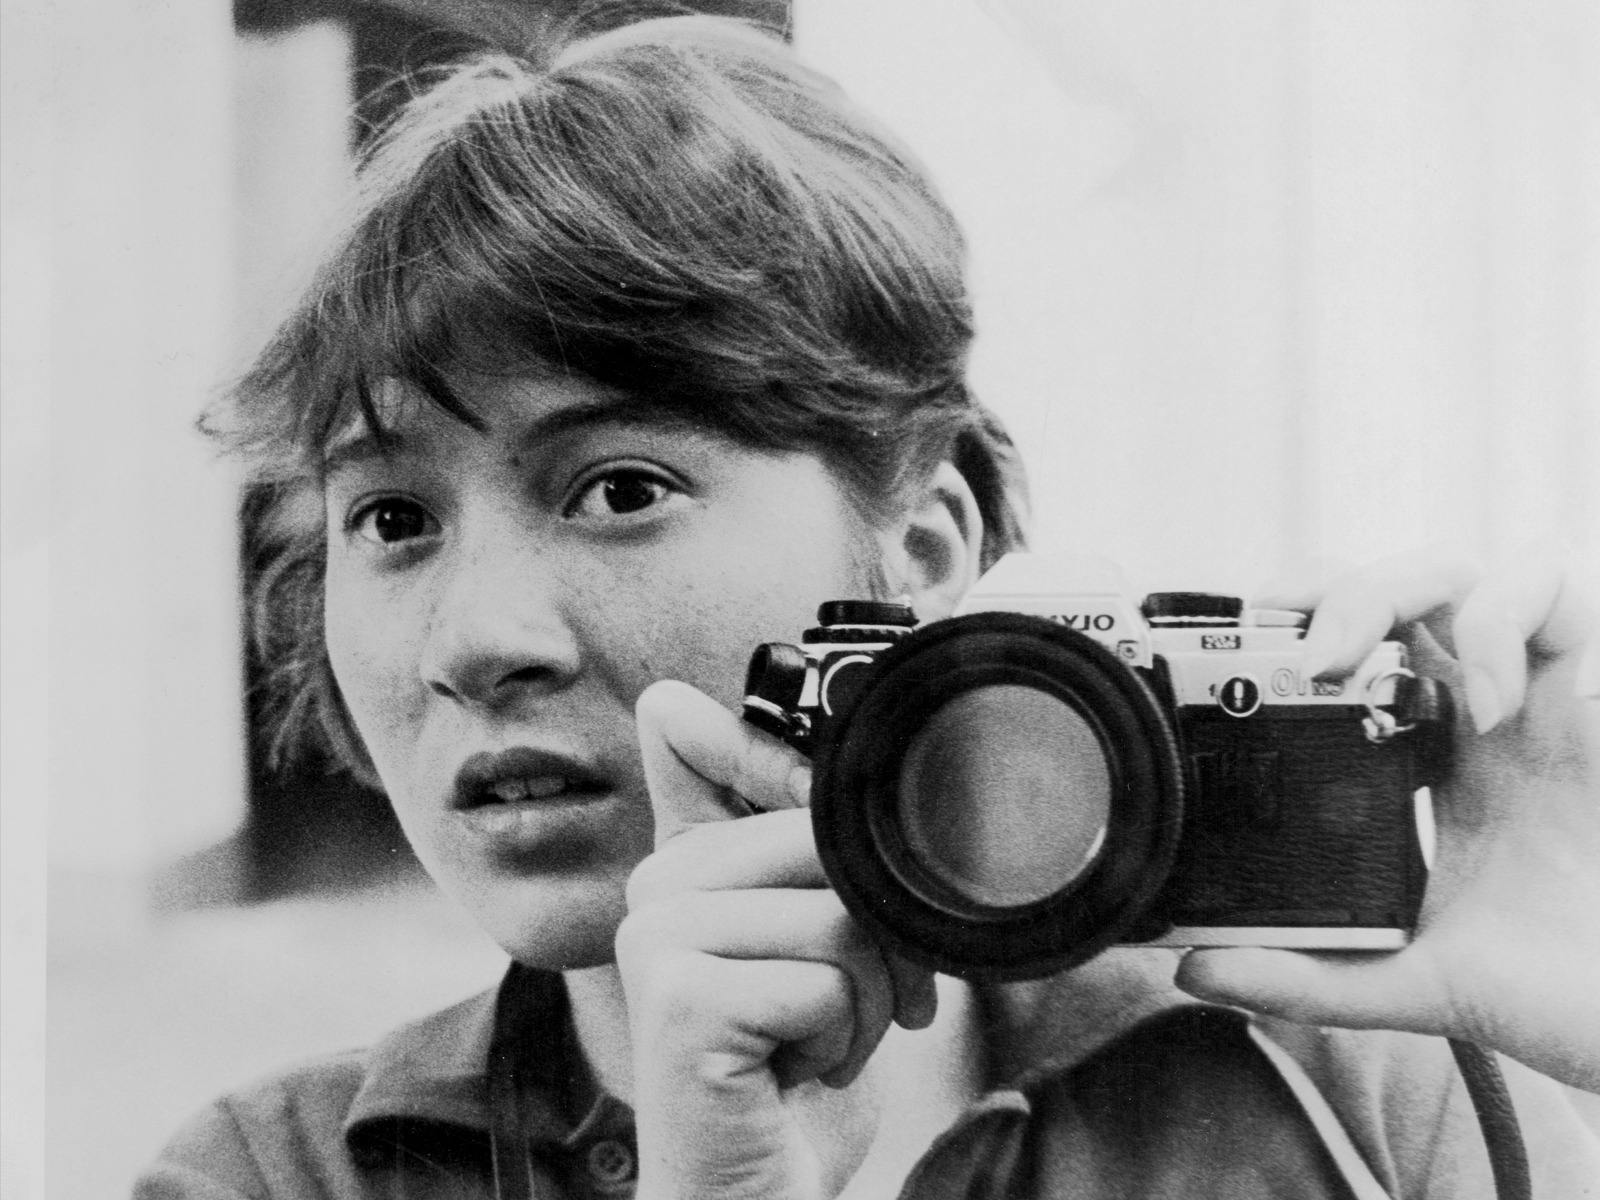 Jane Hutcheon holds a camera up to a mirror. She is young and has kind eyes.  The image is b&w.